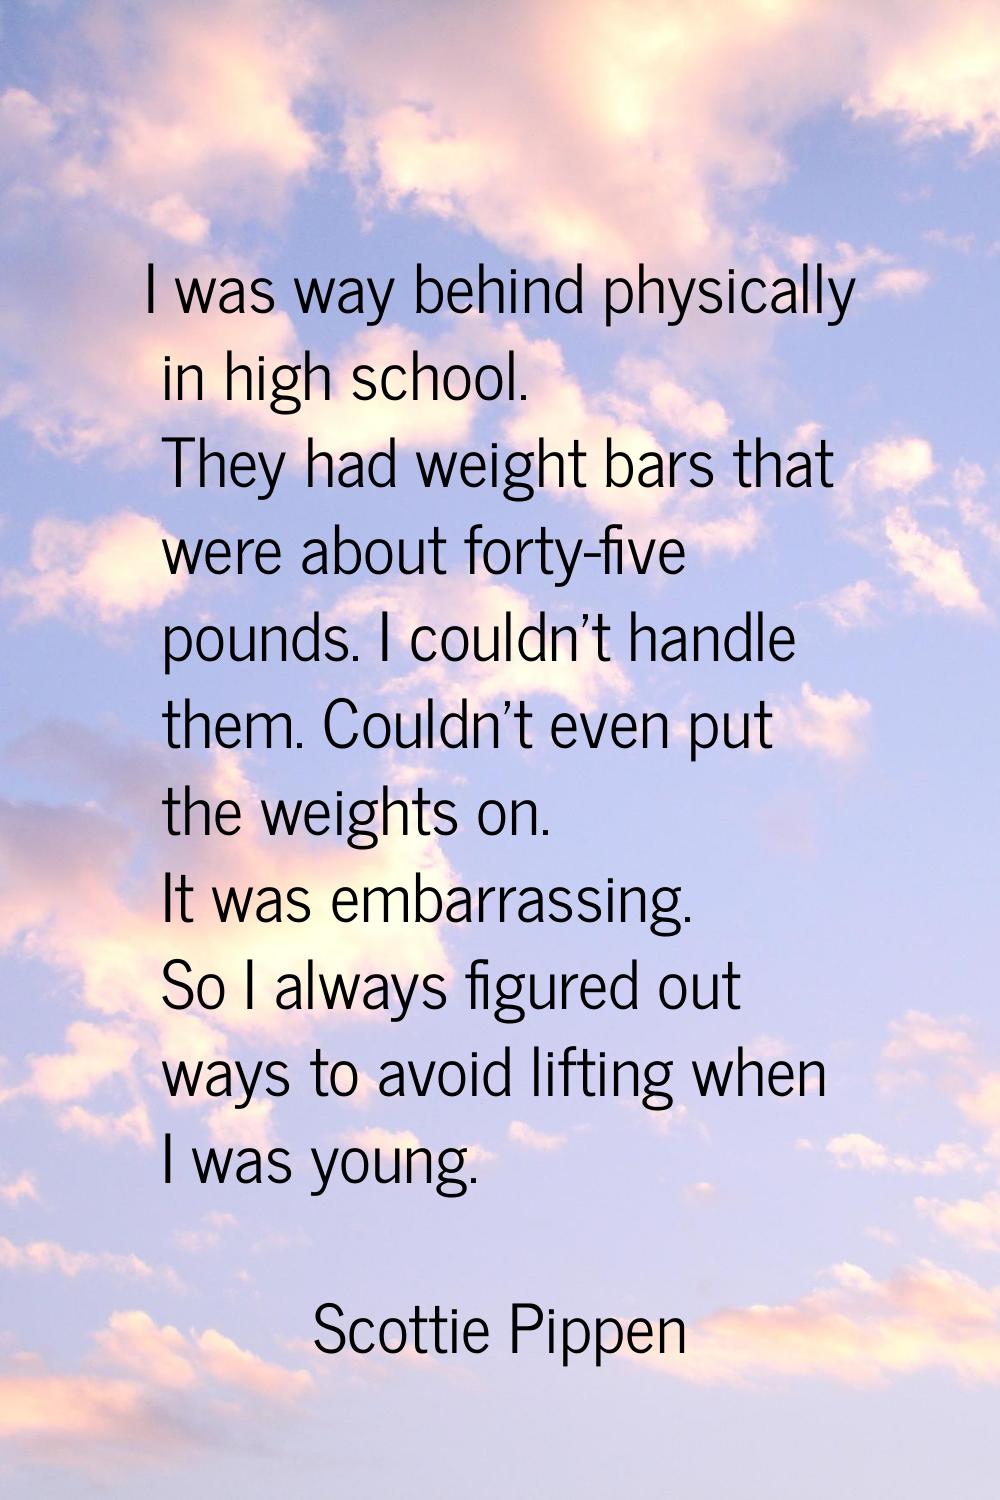 I was way behind physically in high school. They had weight bars that were about forty-five pounds.